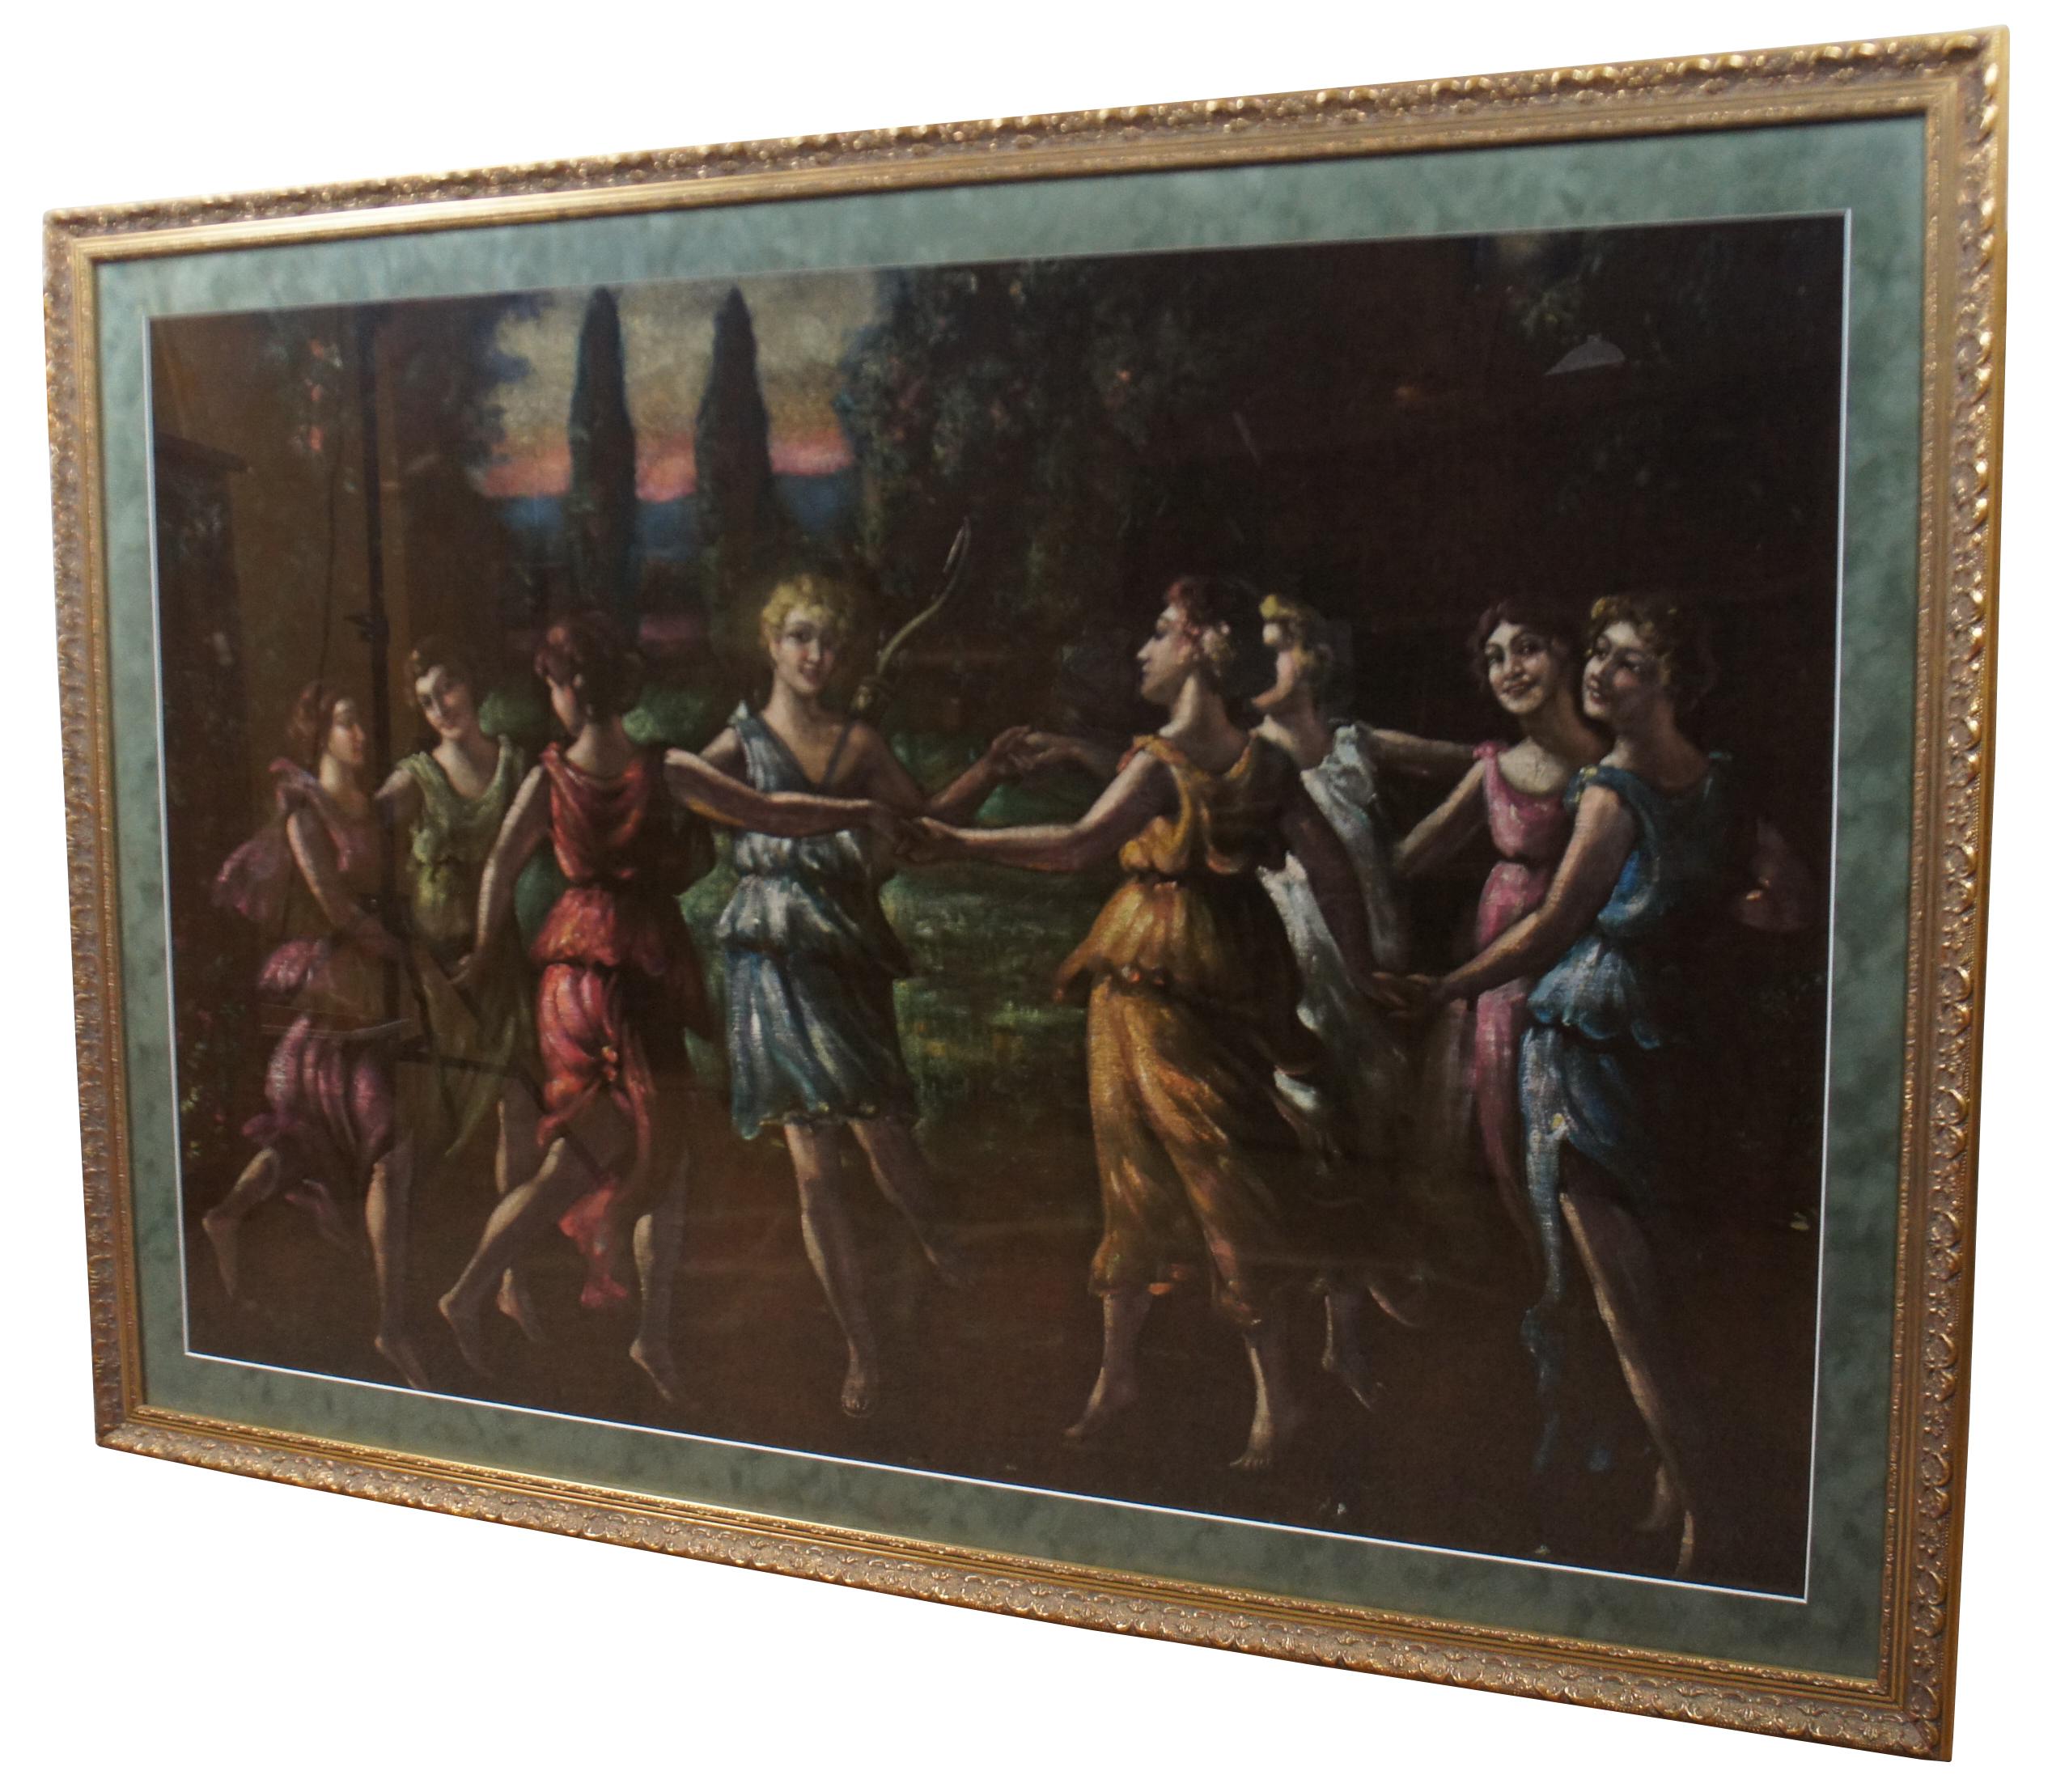 A large antique original oil painting re-imagining “The Dance of Apollo with the Muses” by Baldassare Peruzzi. “Baldassare Tommaso Peruzzi (7 March 1481 – 6 January 1536) was an Italian architect and painter, born in a small town near Siena (in